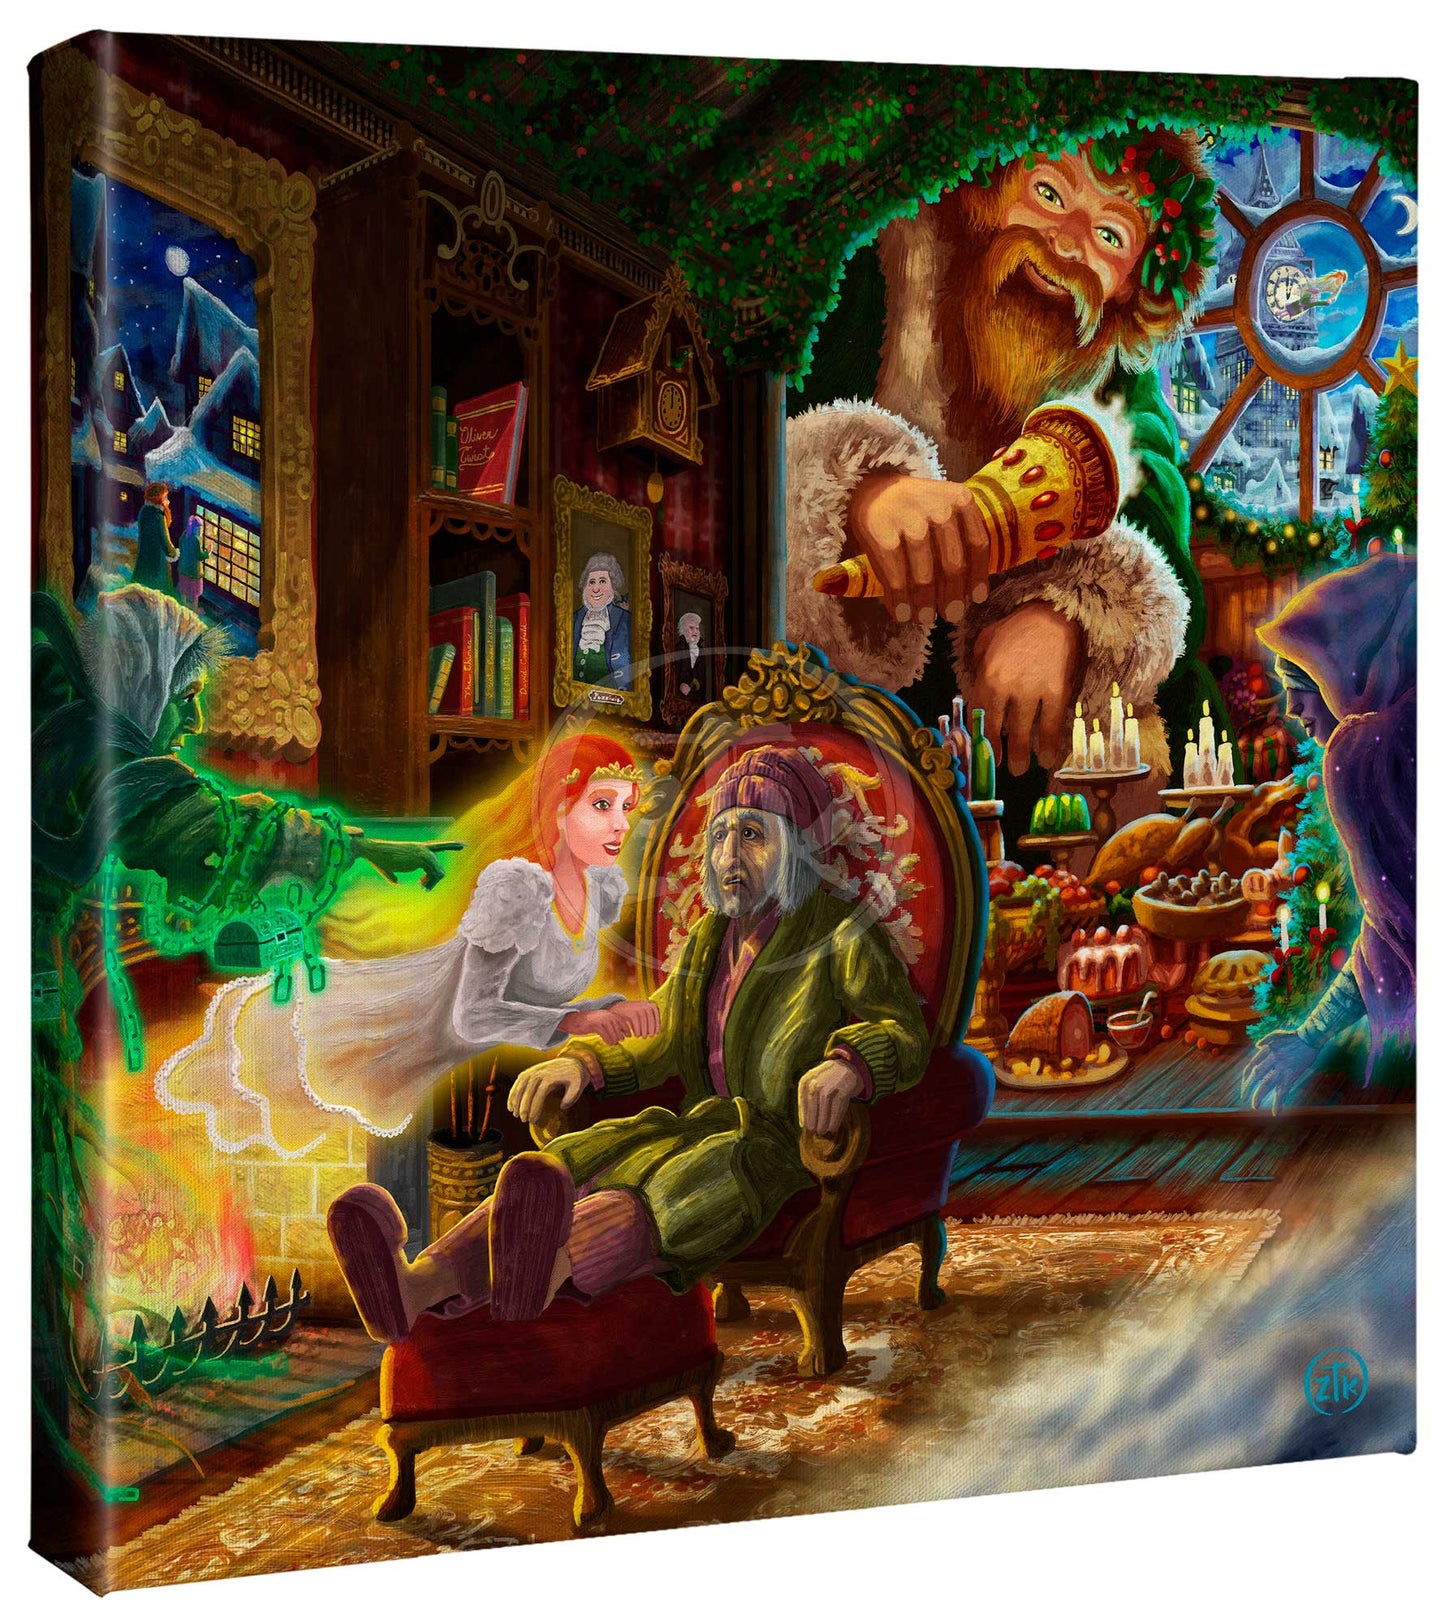 A Christmas Carol - 14" x 14" Gallery Wrapped Canvas